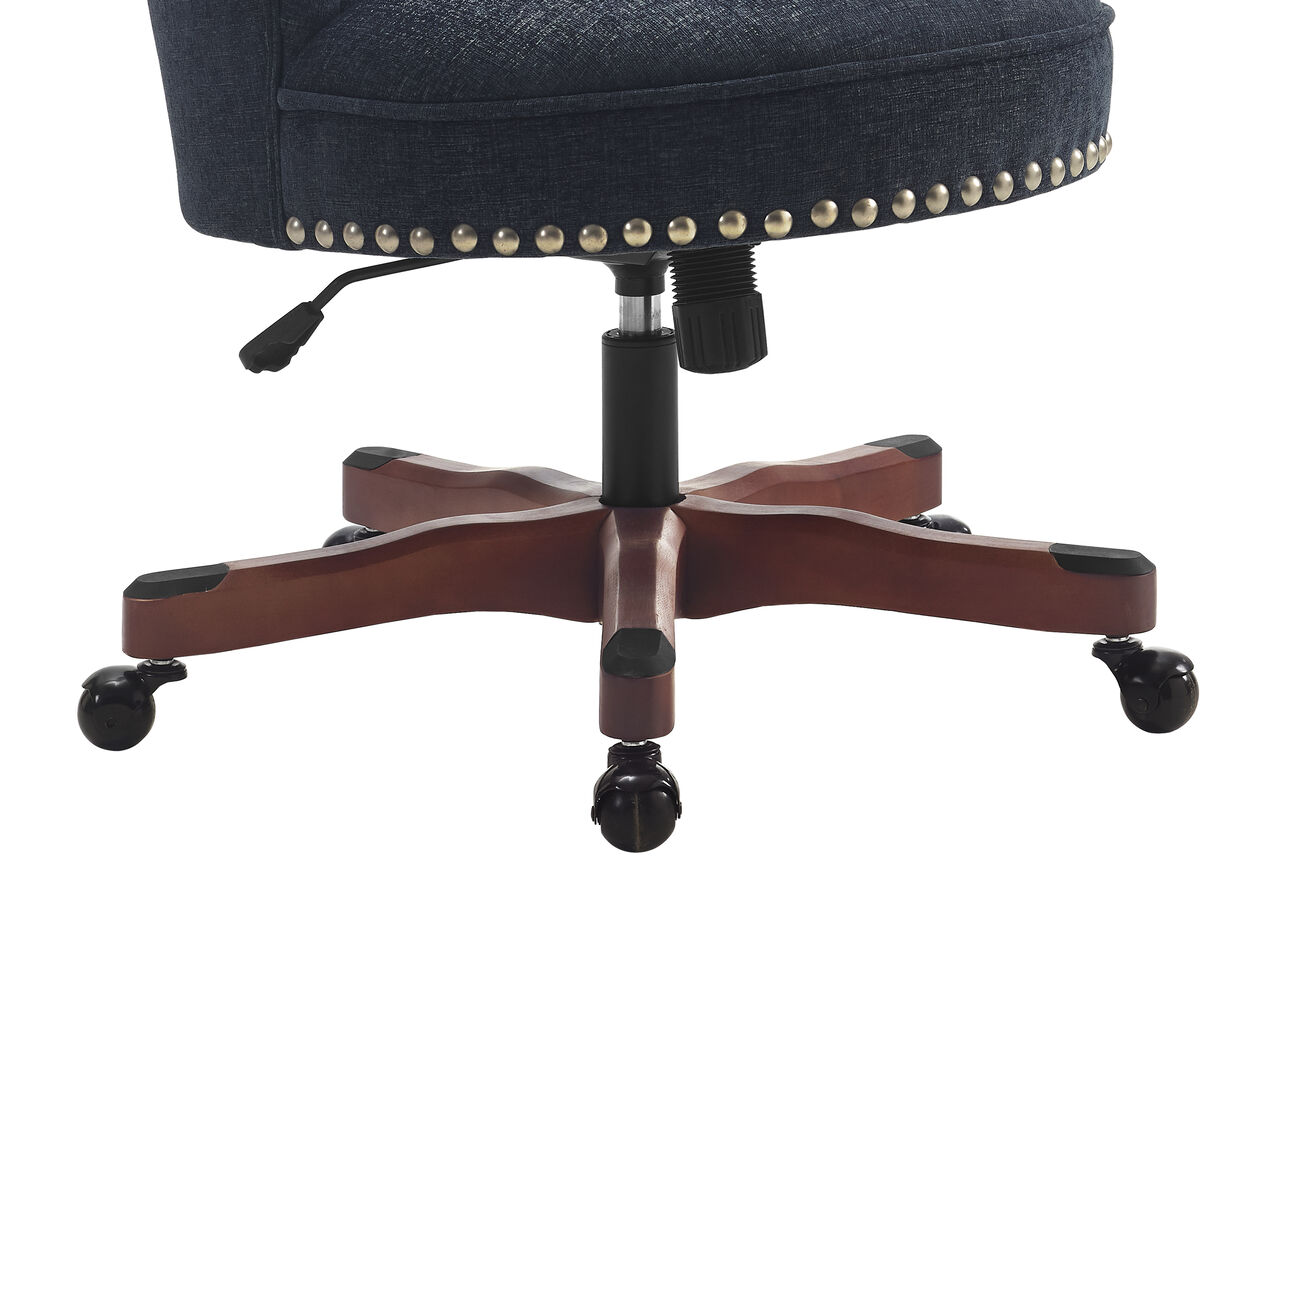 Wooden Office Chair with Button Tufted Backrest, Navy Blue and Brown